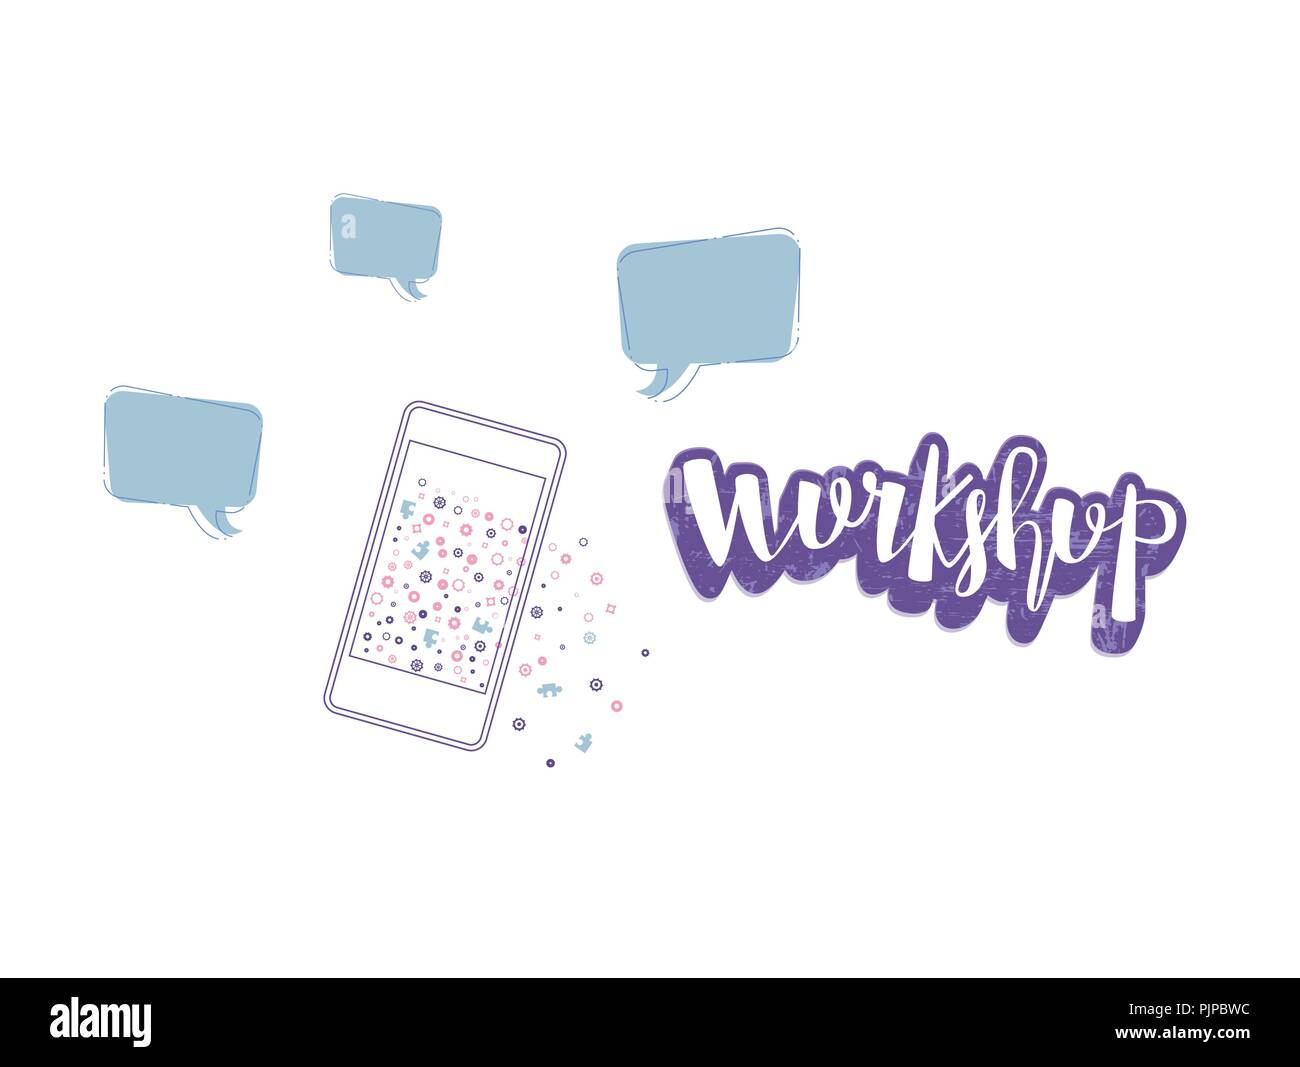 Workshop composition. Template with handwritten lettering, speech bubbles and phone. Vector illustration. Stock Vector